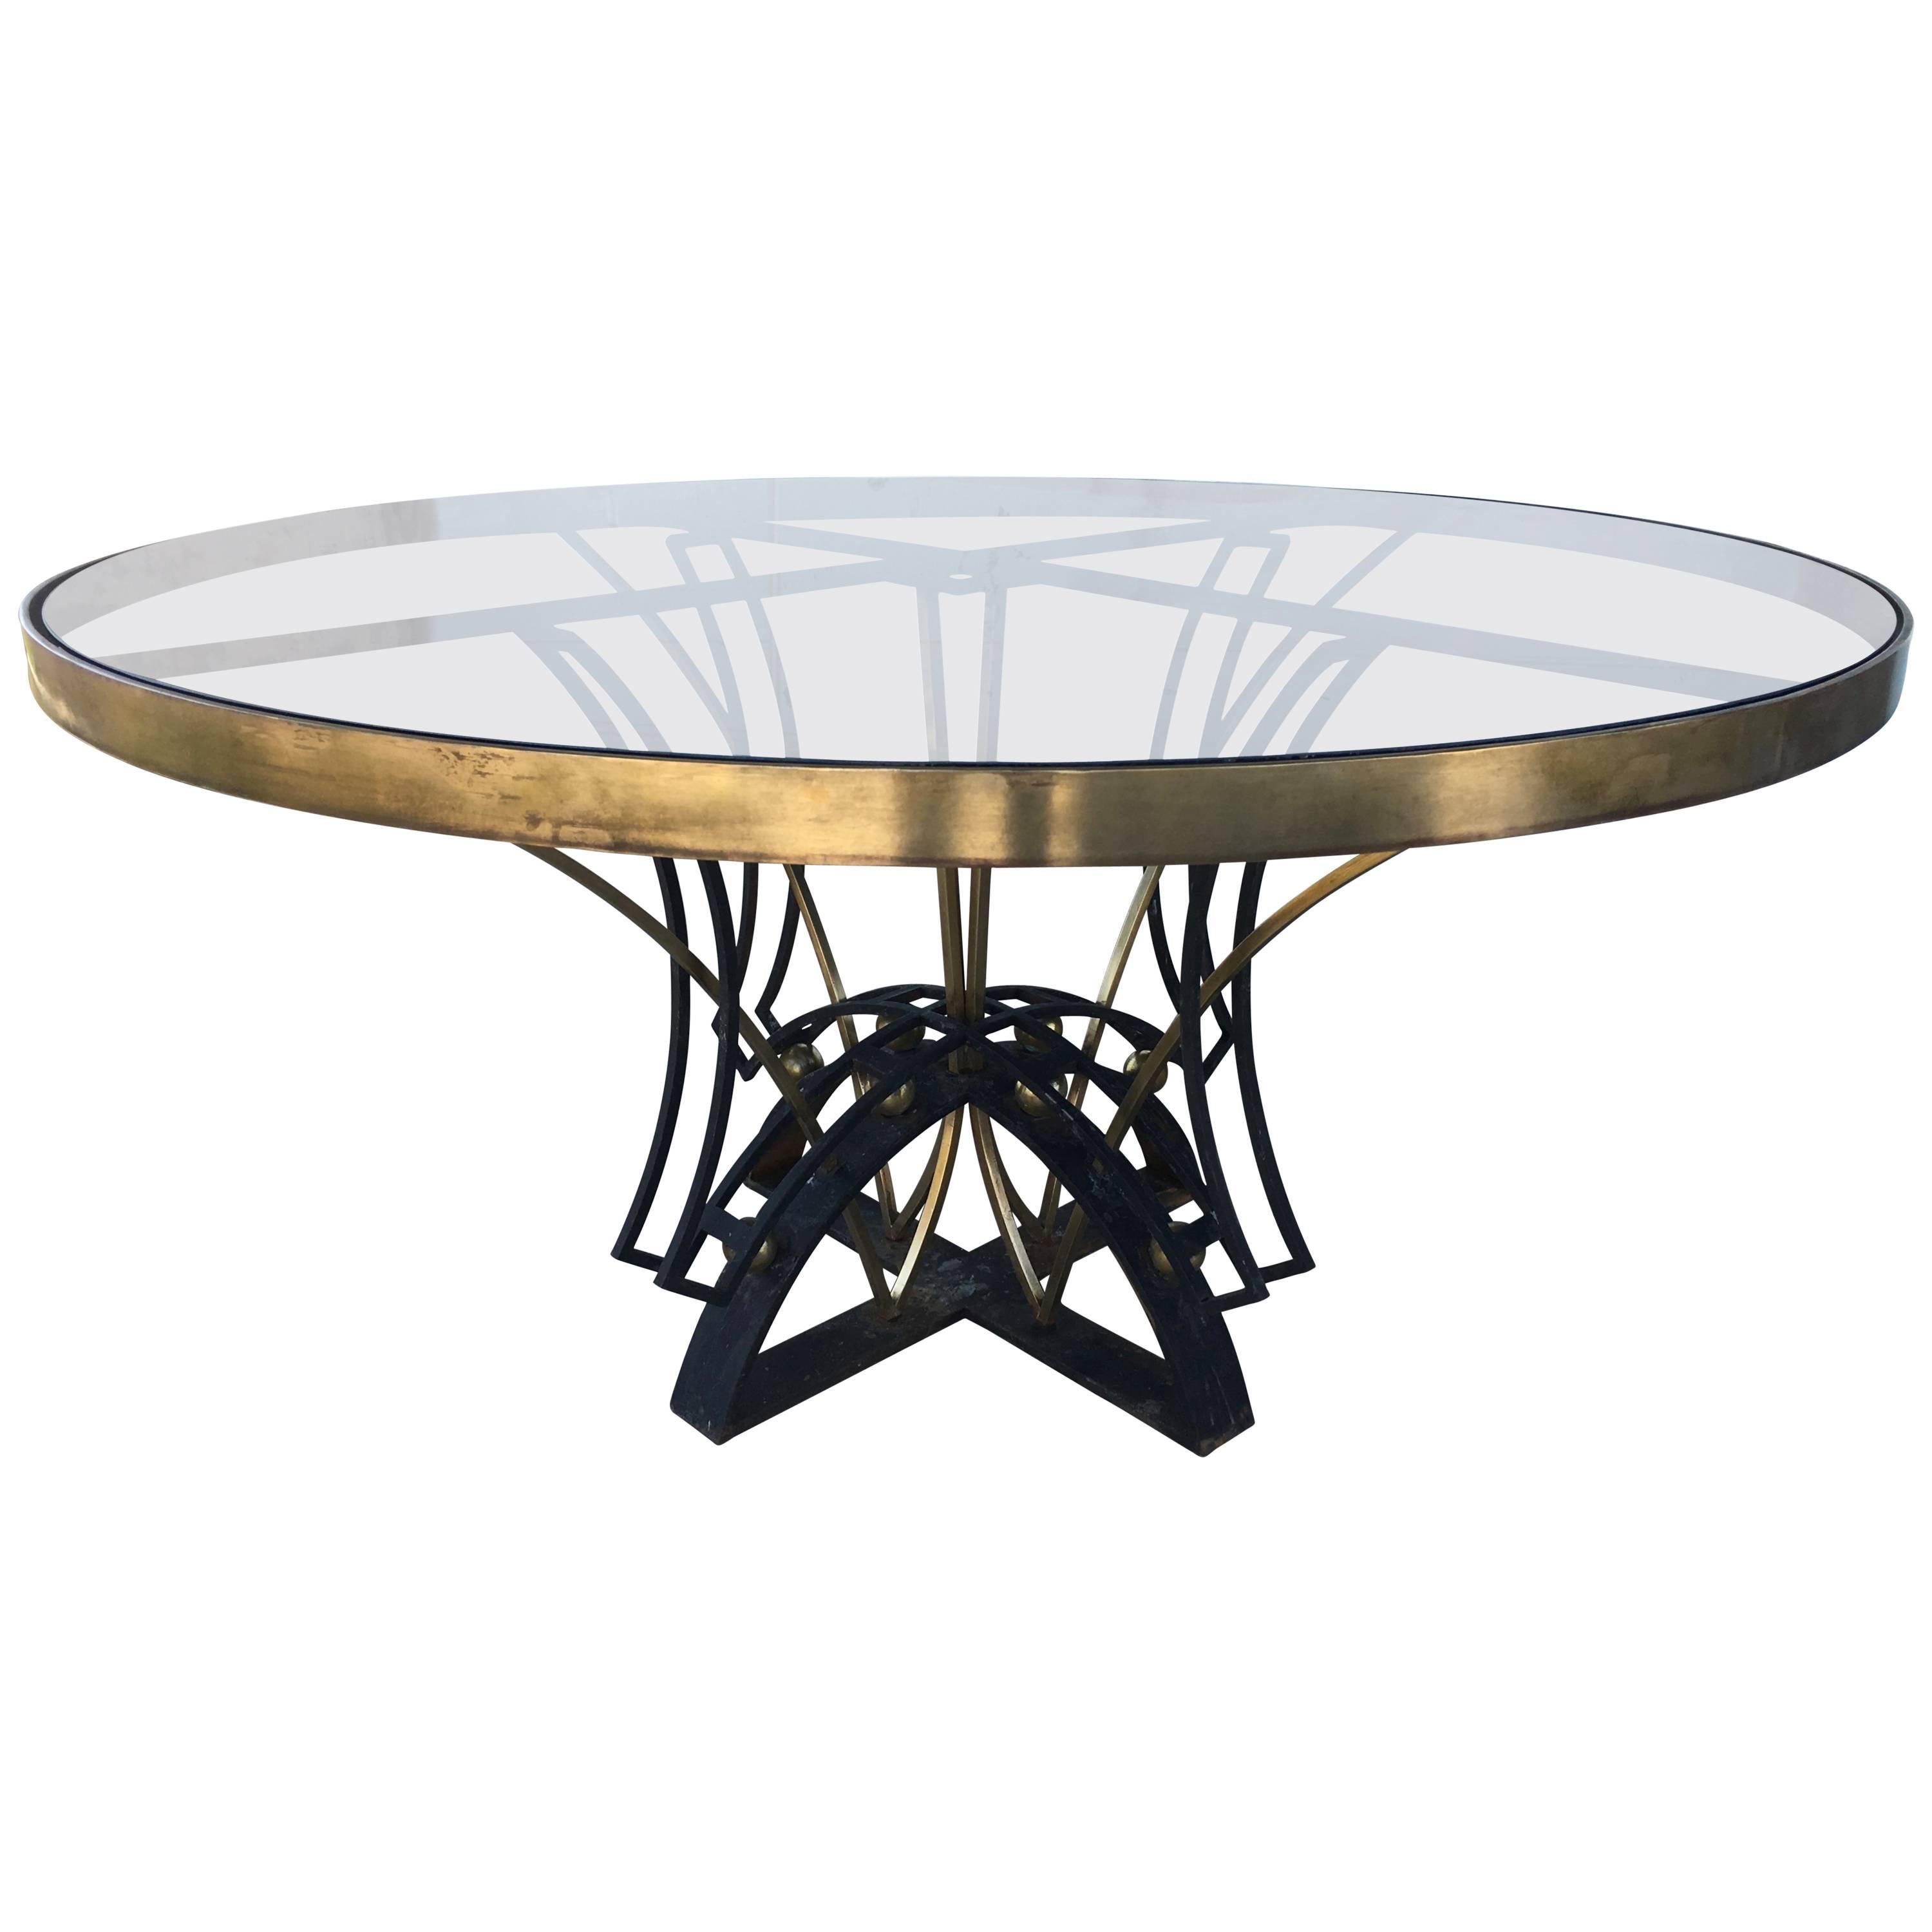 Superb Iron and Brass Round Dining Table by Arturo Pani, Mexico City circa 1950s For Sale